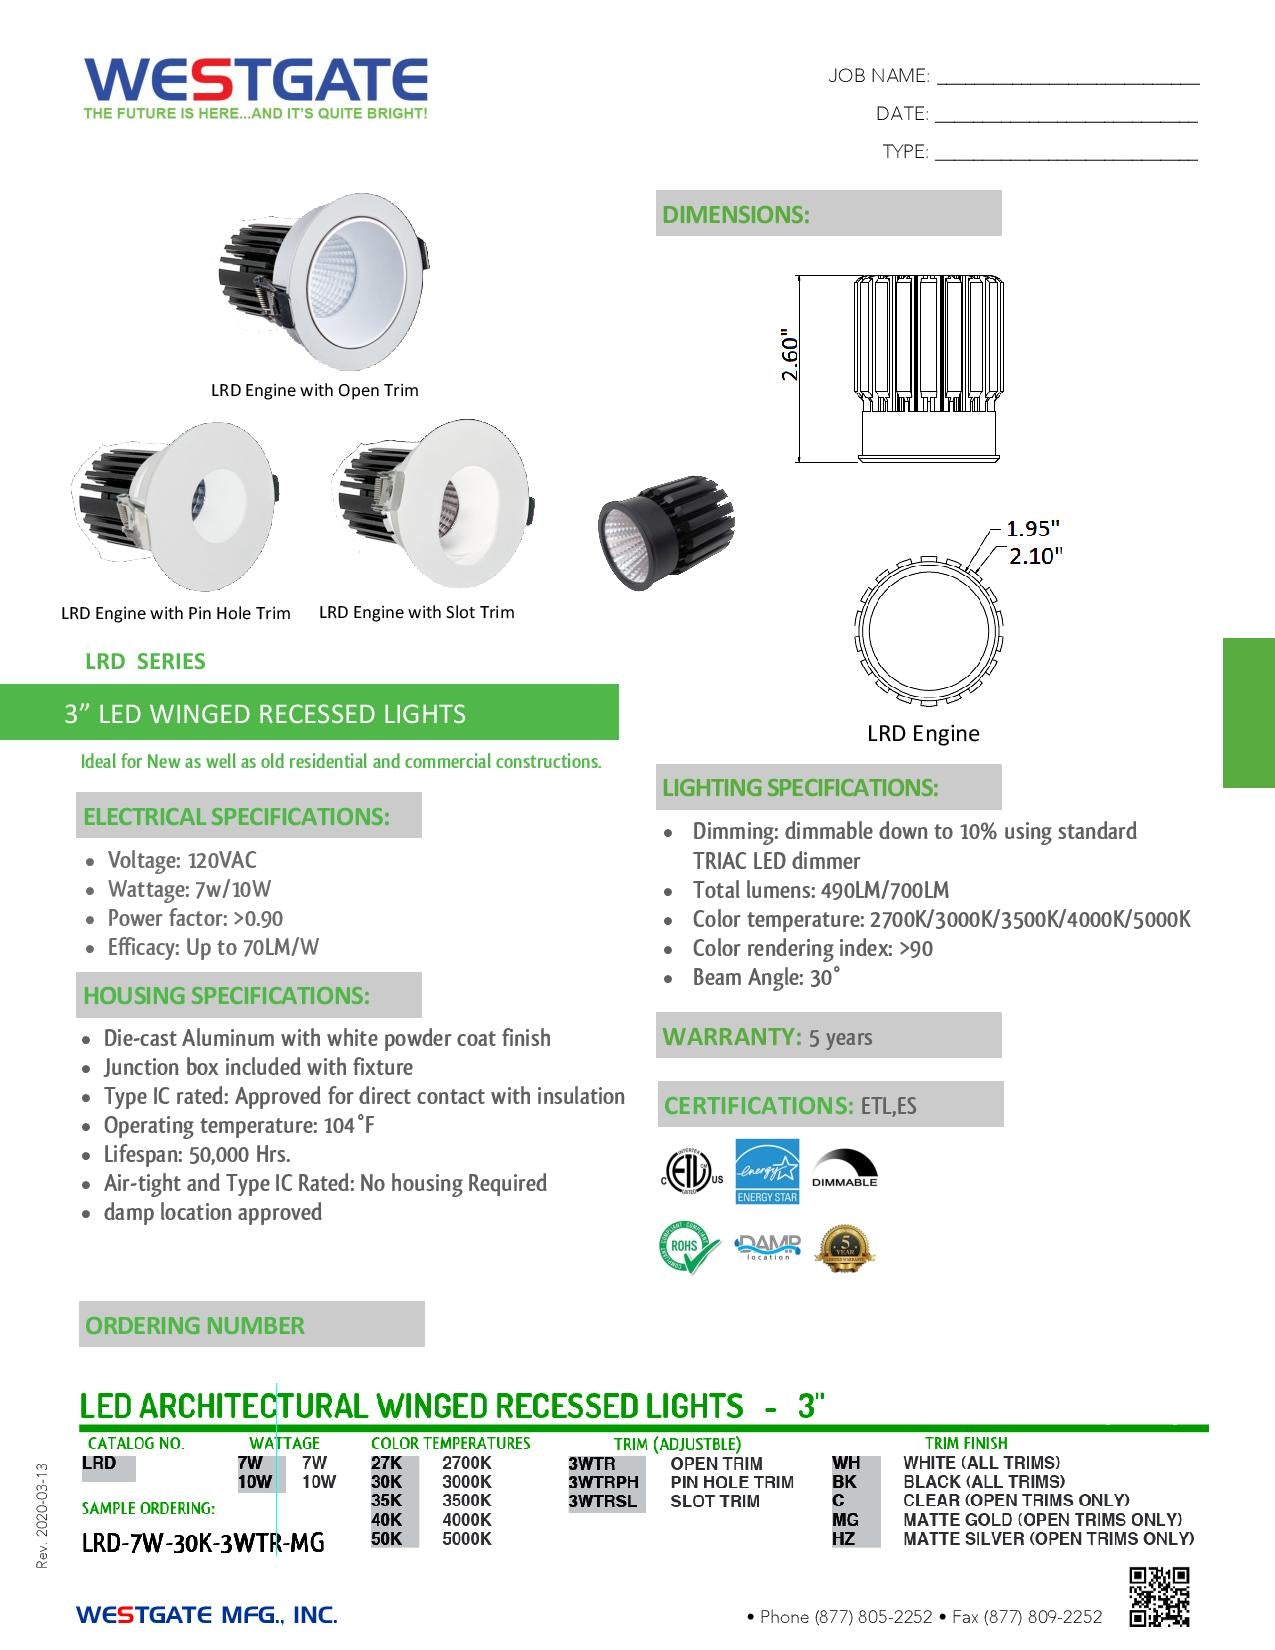 LED 3" Architectural Winged Recessed Lights - Slot Trim